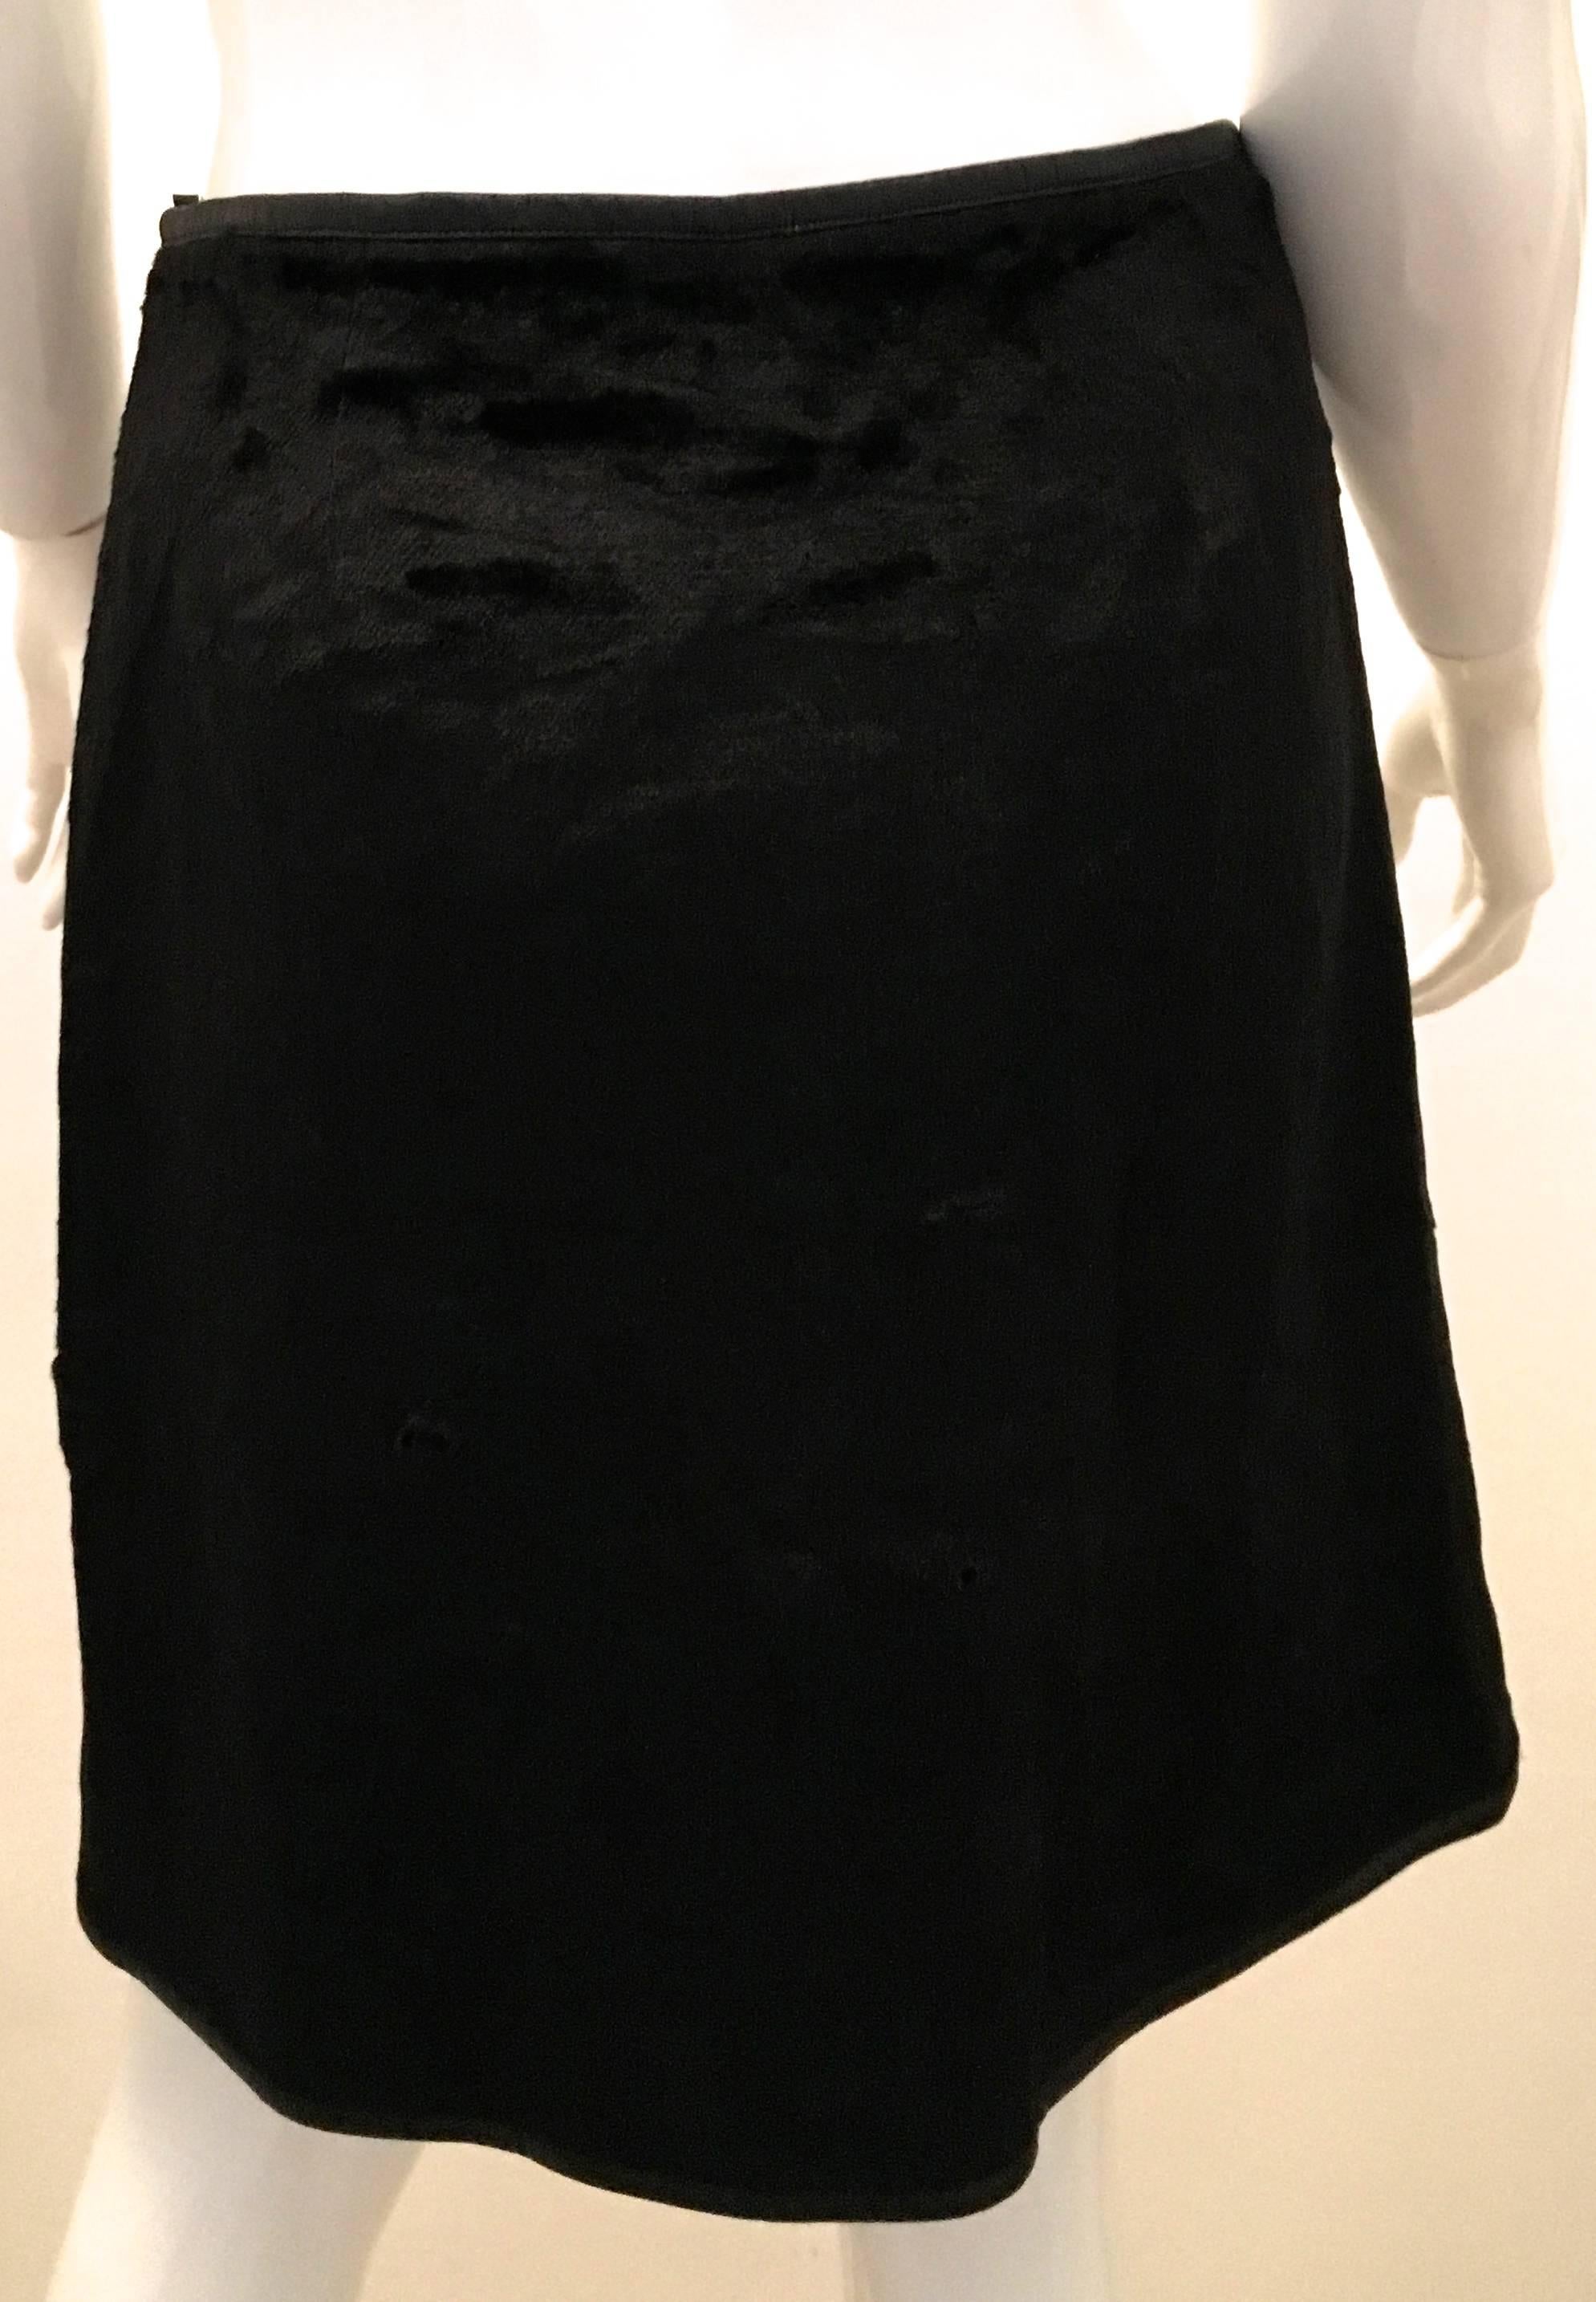 This Courreges 21 faux fur skirt is a great representation of everything happy and fun that Andre Courreges recommended. The skirt has not been altered and is marked a size 40 which fits like a US size 6. The waist measures 28 inches. The zipper